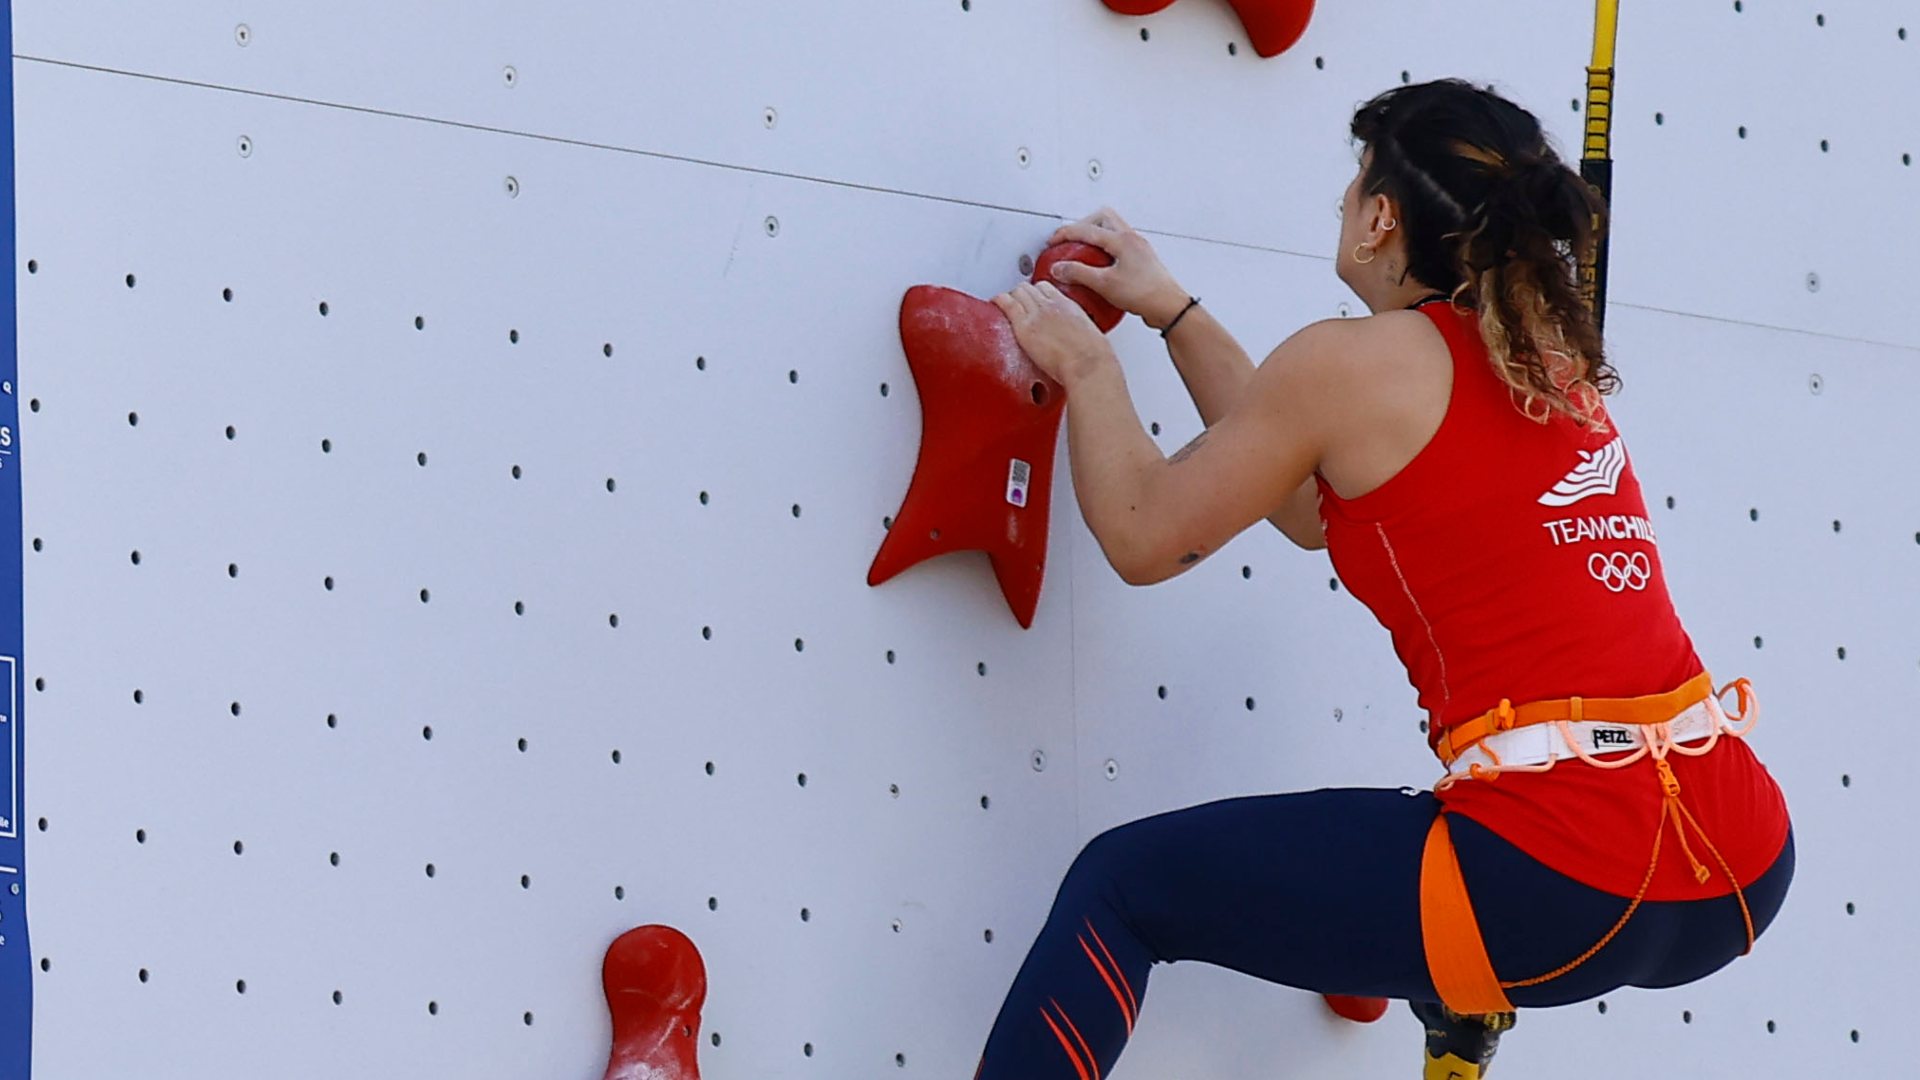 Anahi Riveros competes during the Sport Climbing test event day 1 at the Muros de Escalada Parque Cerrillos sports center on October 6th, 2023, in Santiago, Chile.